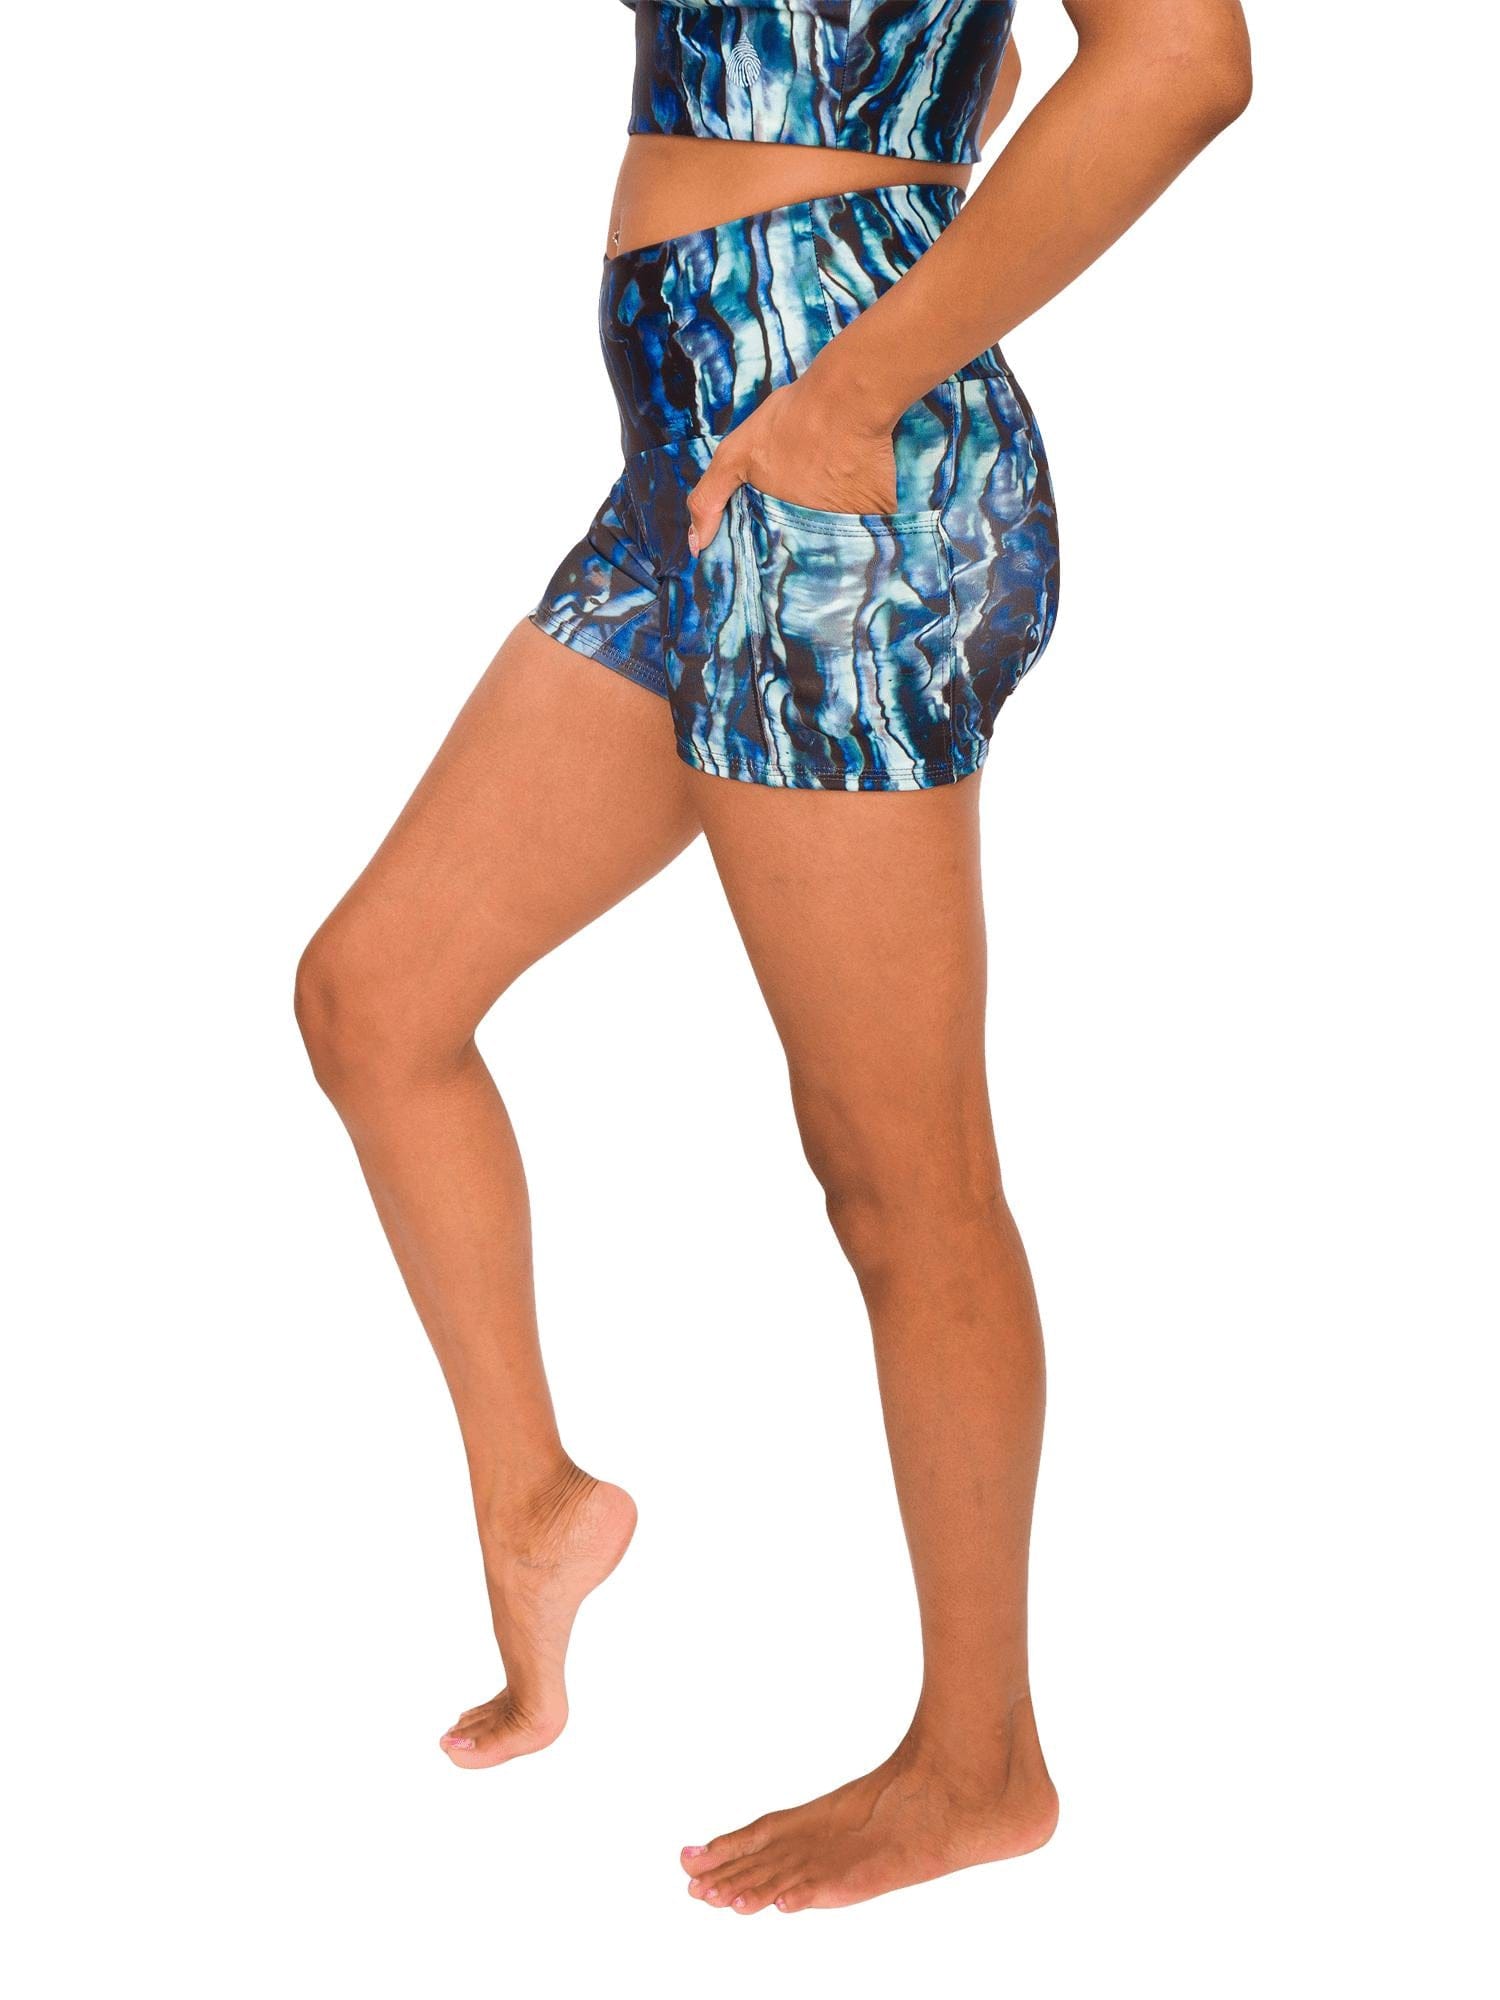 Model: Syriah is a sea turtle conservation biologist. She is 5'7", 130lbs and is wearing a size S shorts and S top. 